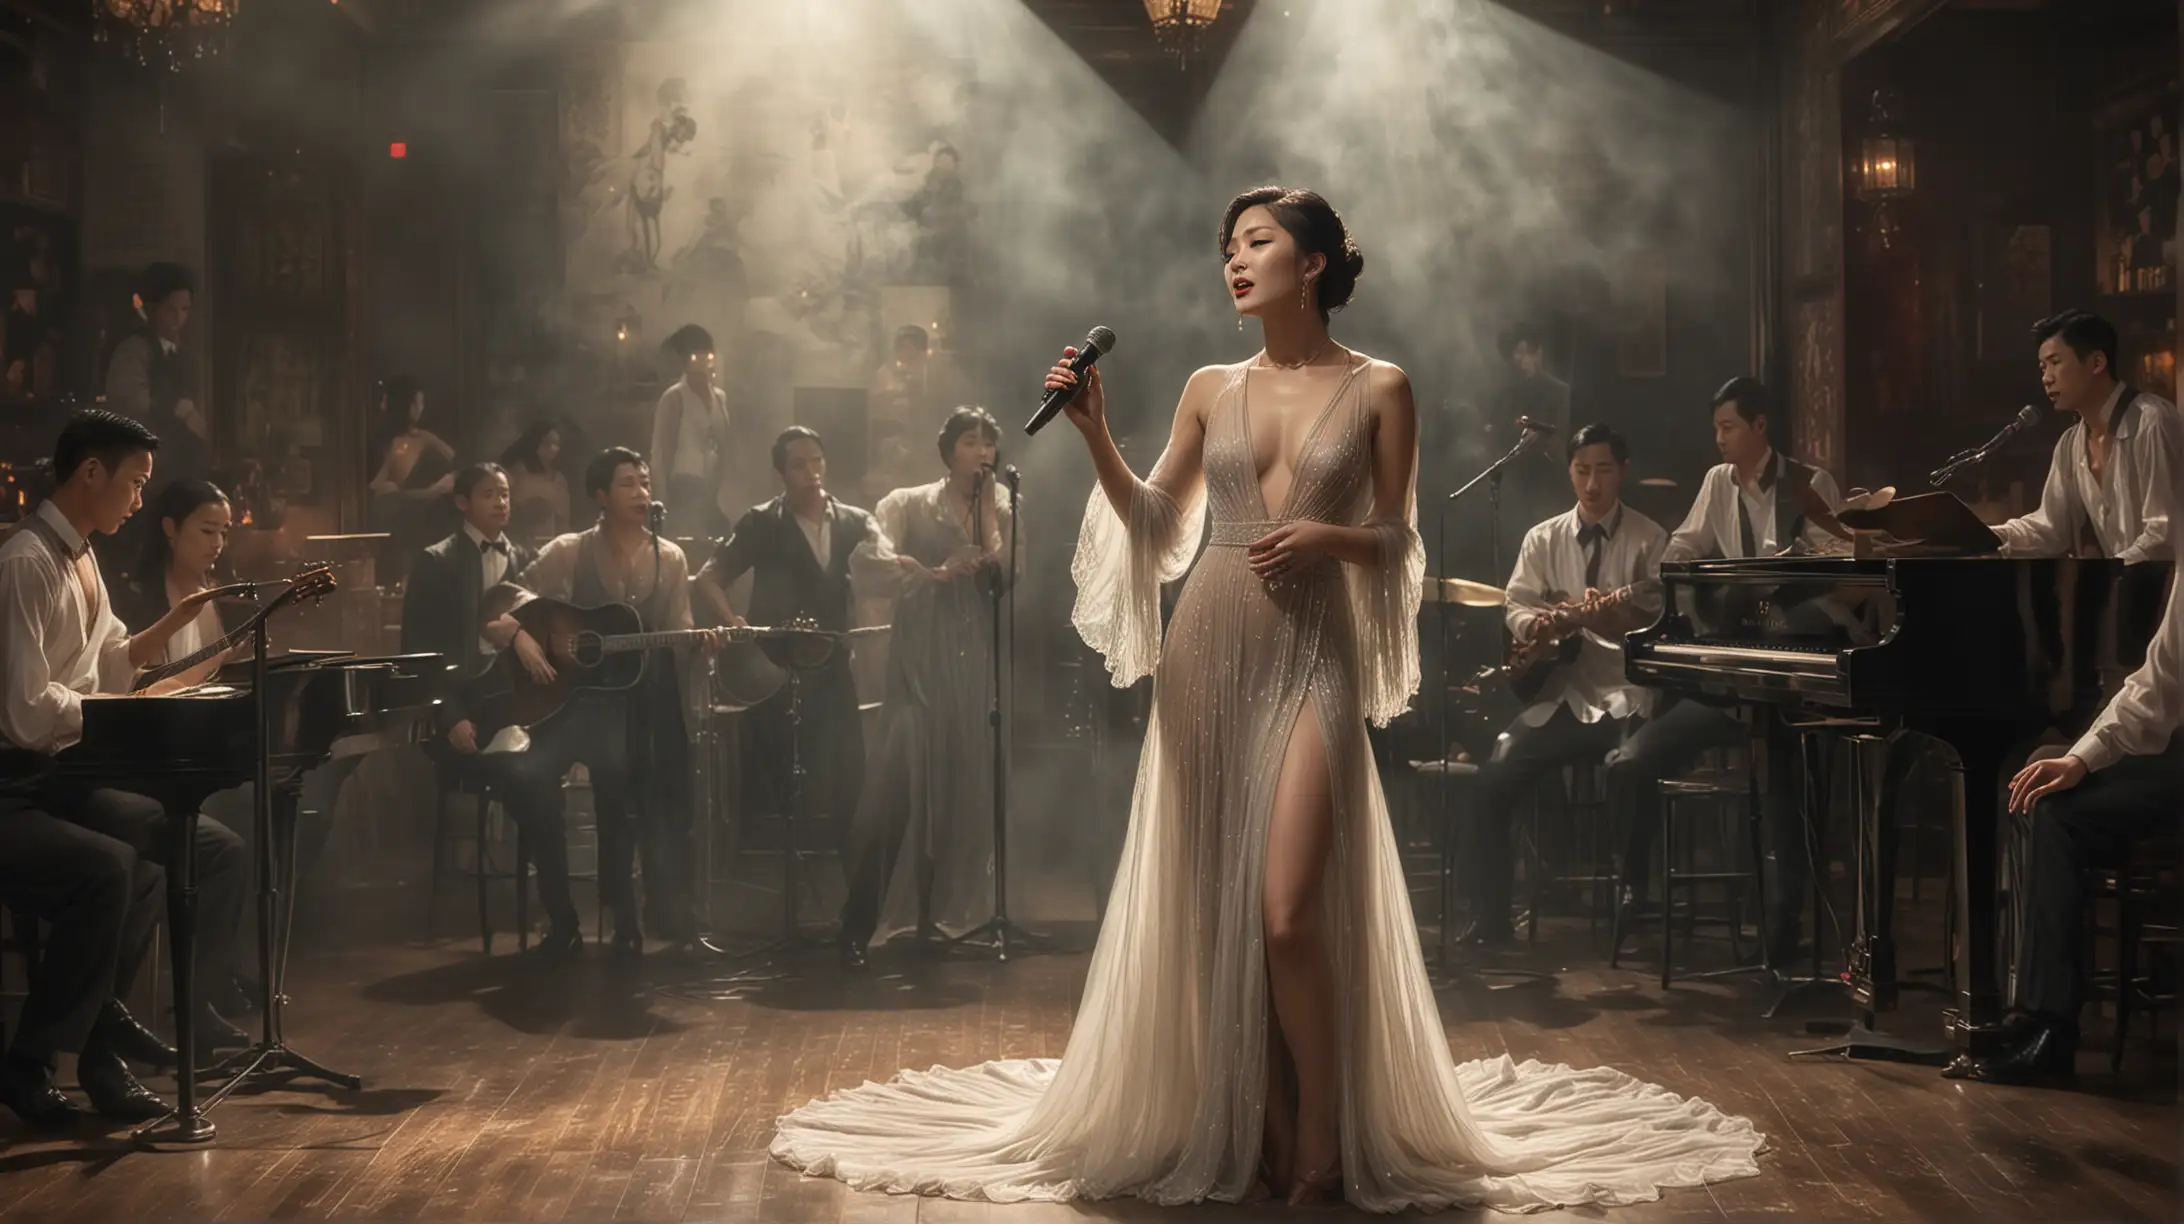 Sultry Chinese Singer in Prohibition Era Nightclub